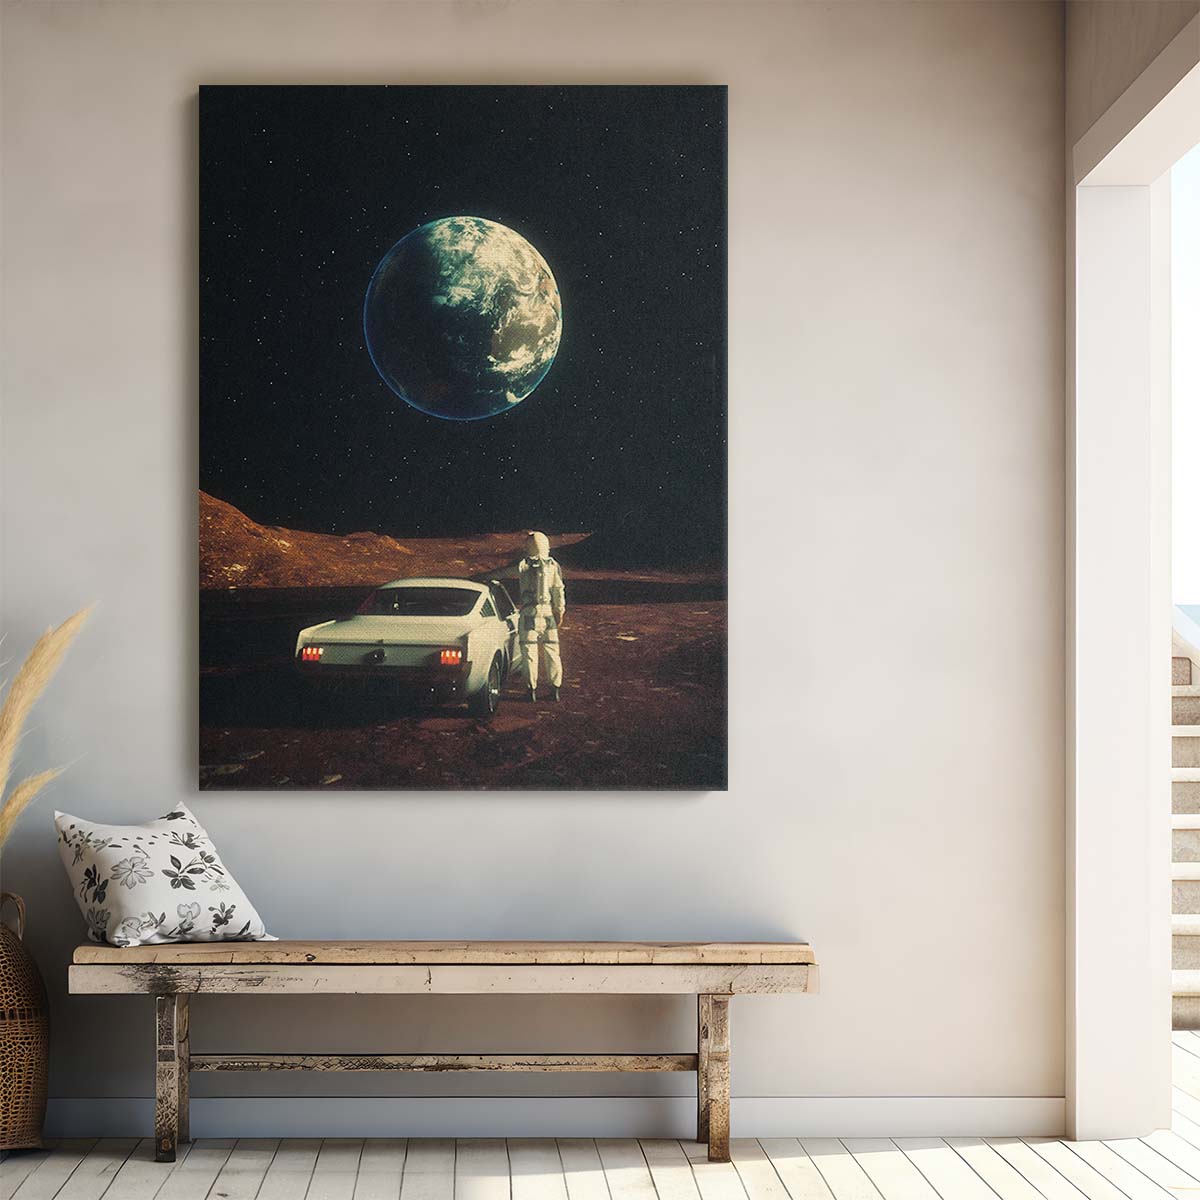 Far From Home Futuristic Space Travel Collage Art by Taudalpoi by Luxuriance Designs, made in USA